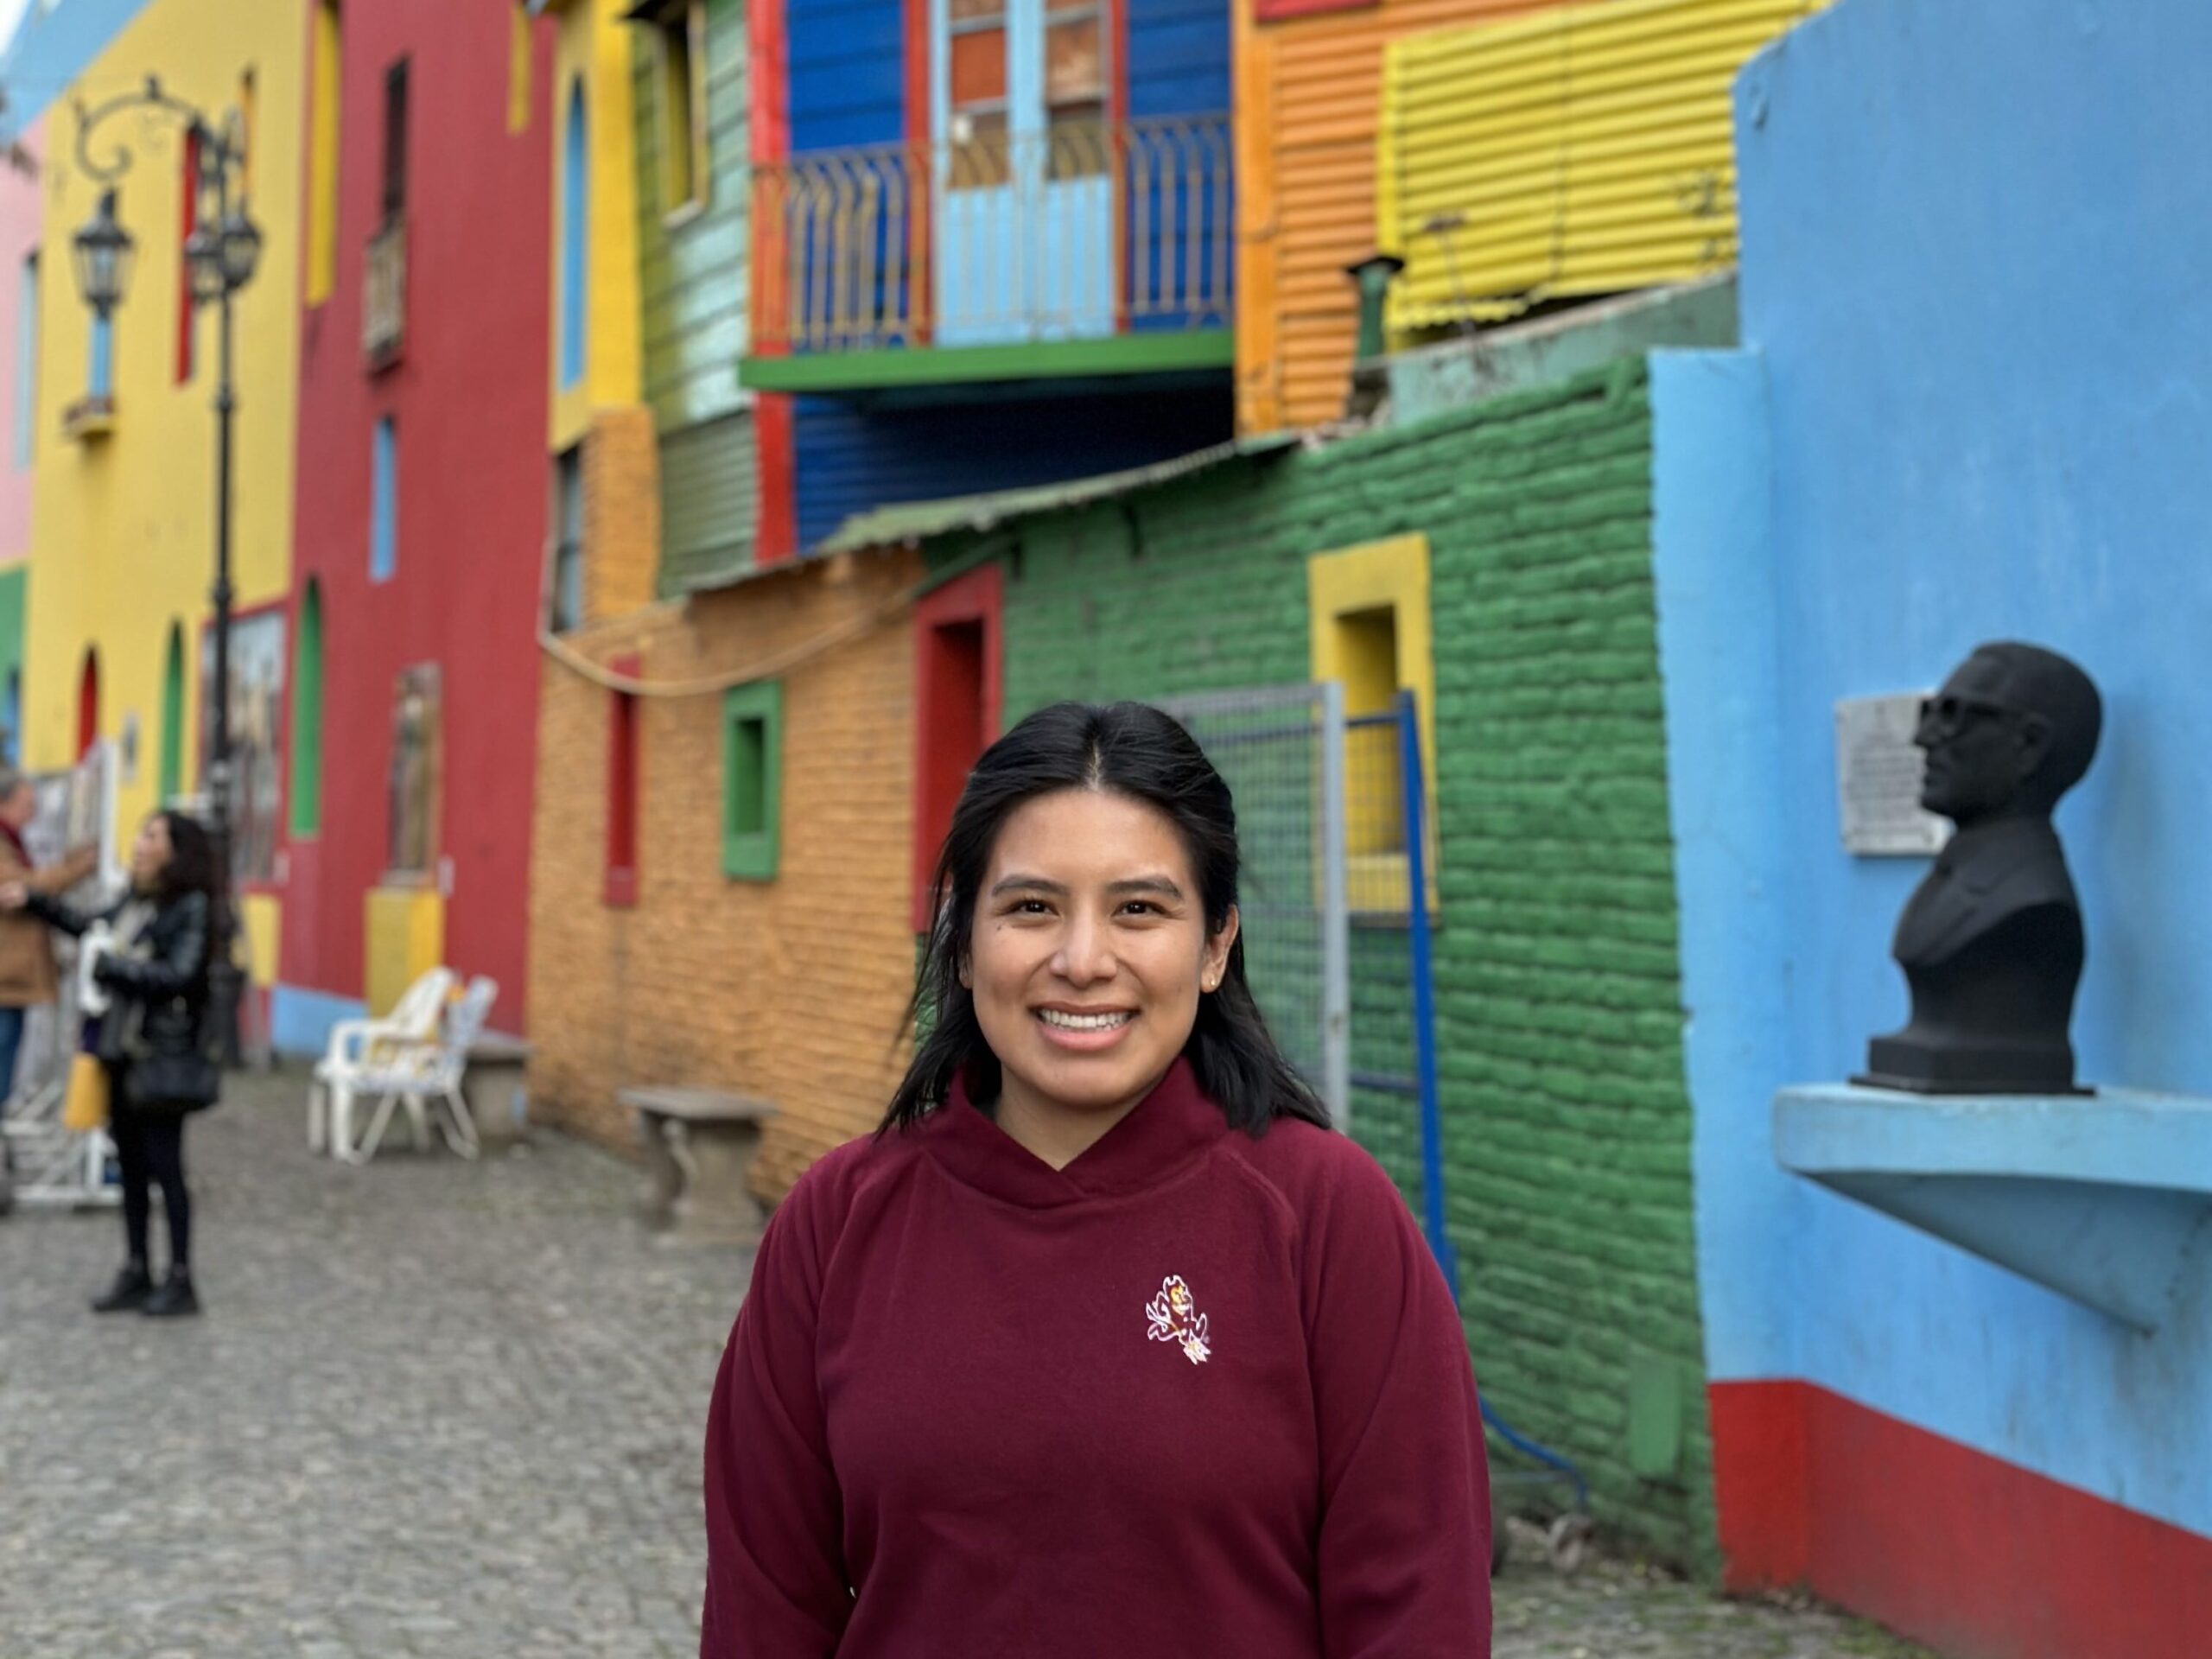 Fulbrighter standing in front of colorful houses in Argentina